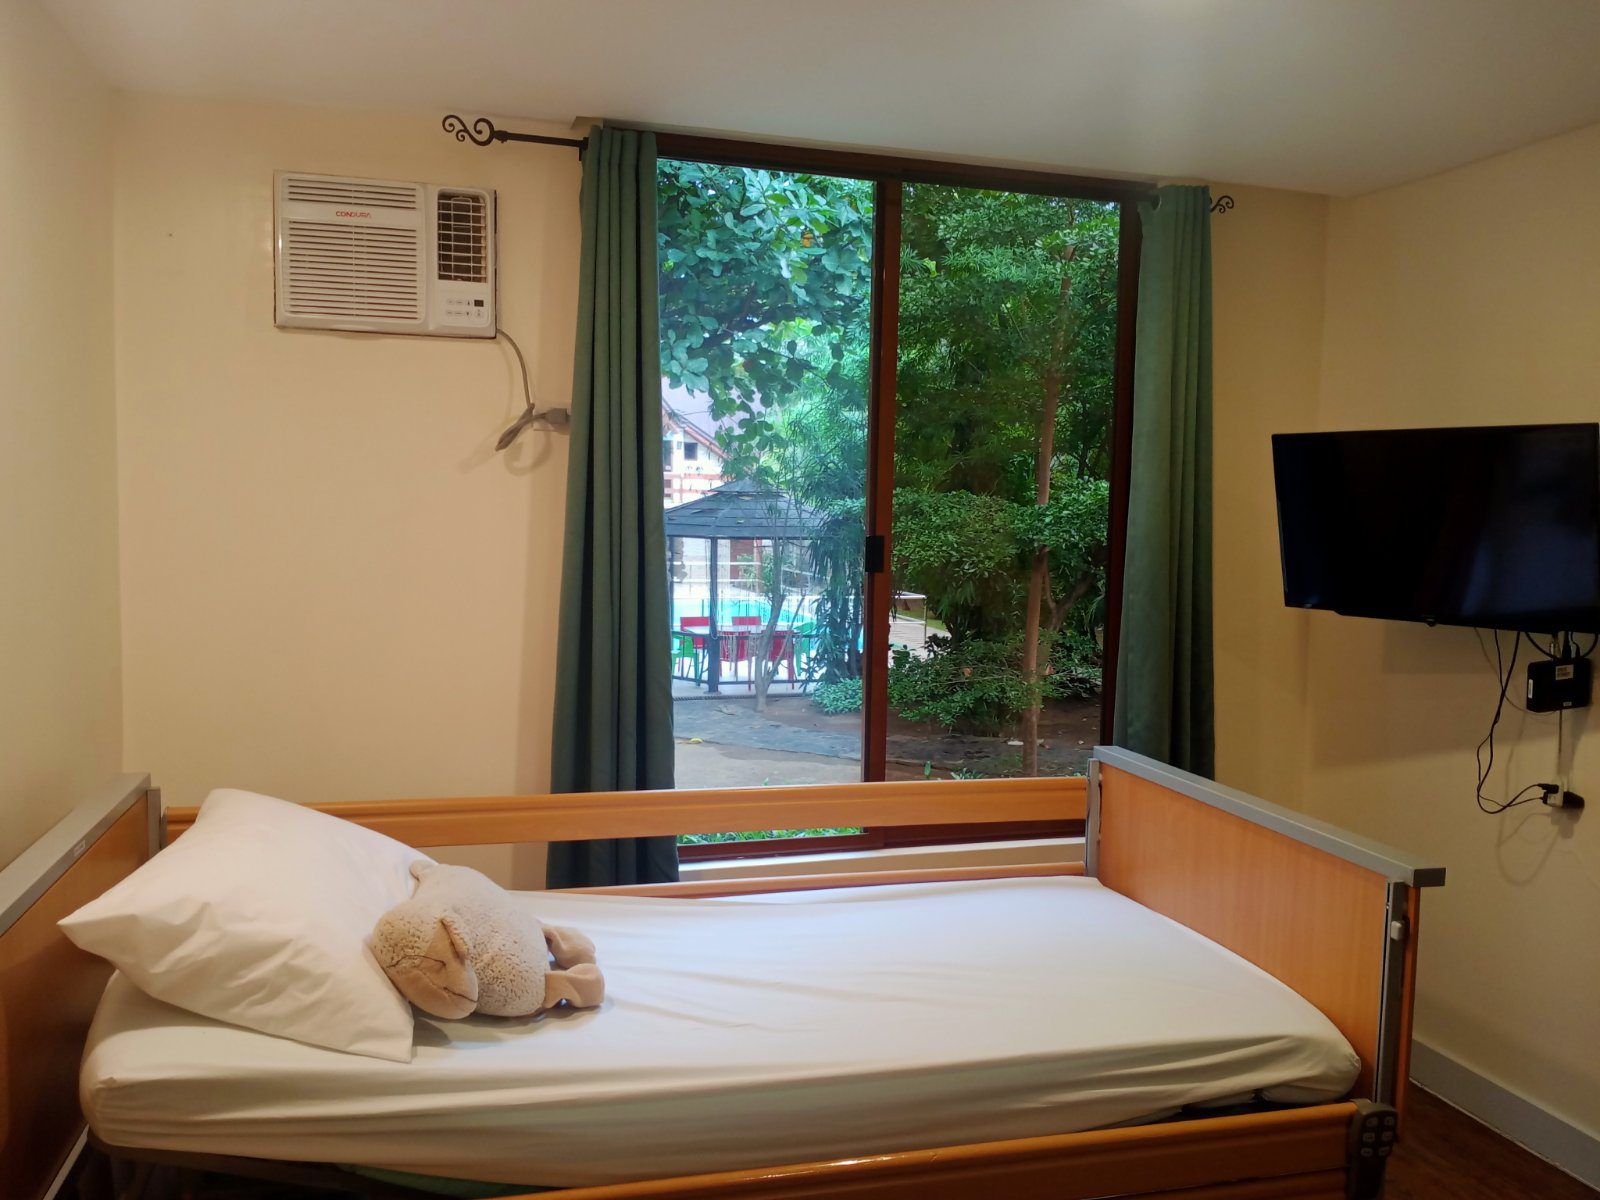 Airconditioned Room With Tv